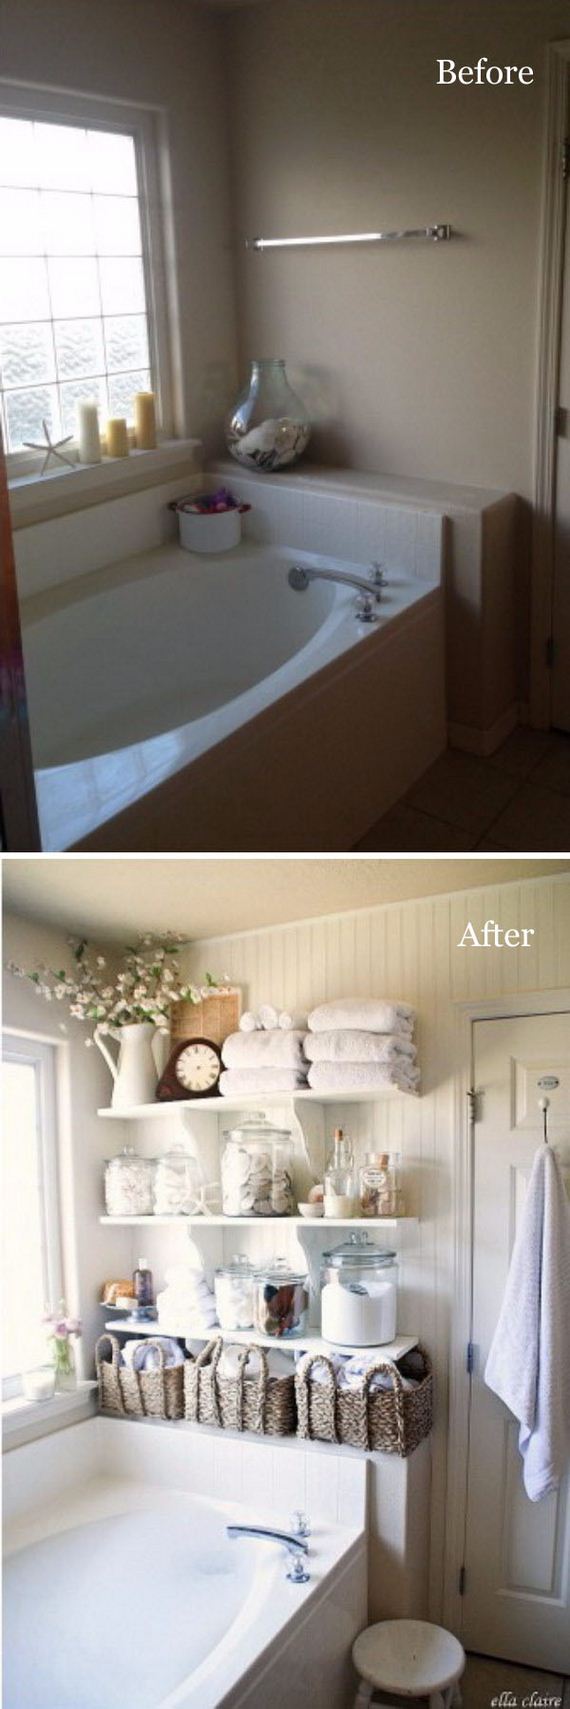 03-awesome-bathroom-makeovers